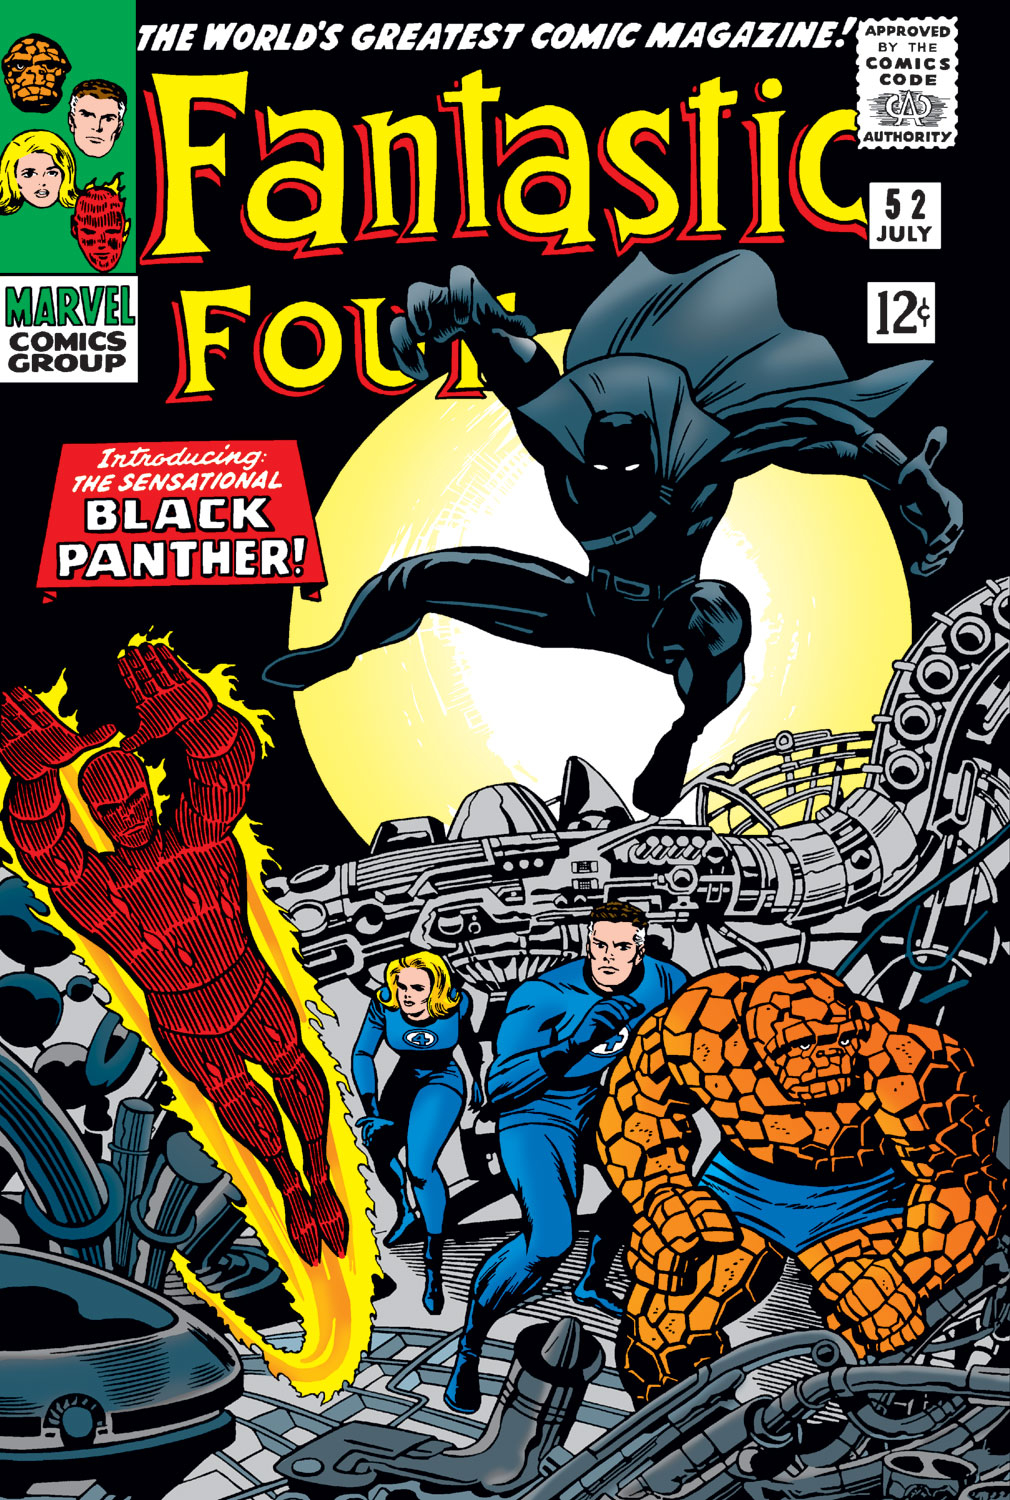 Read online Fantastic Four (1961) comic -  Issue #52 - 1